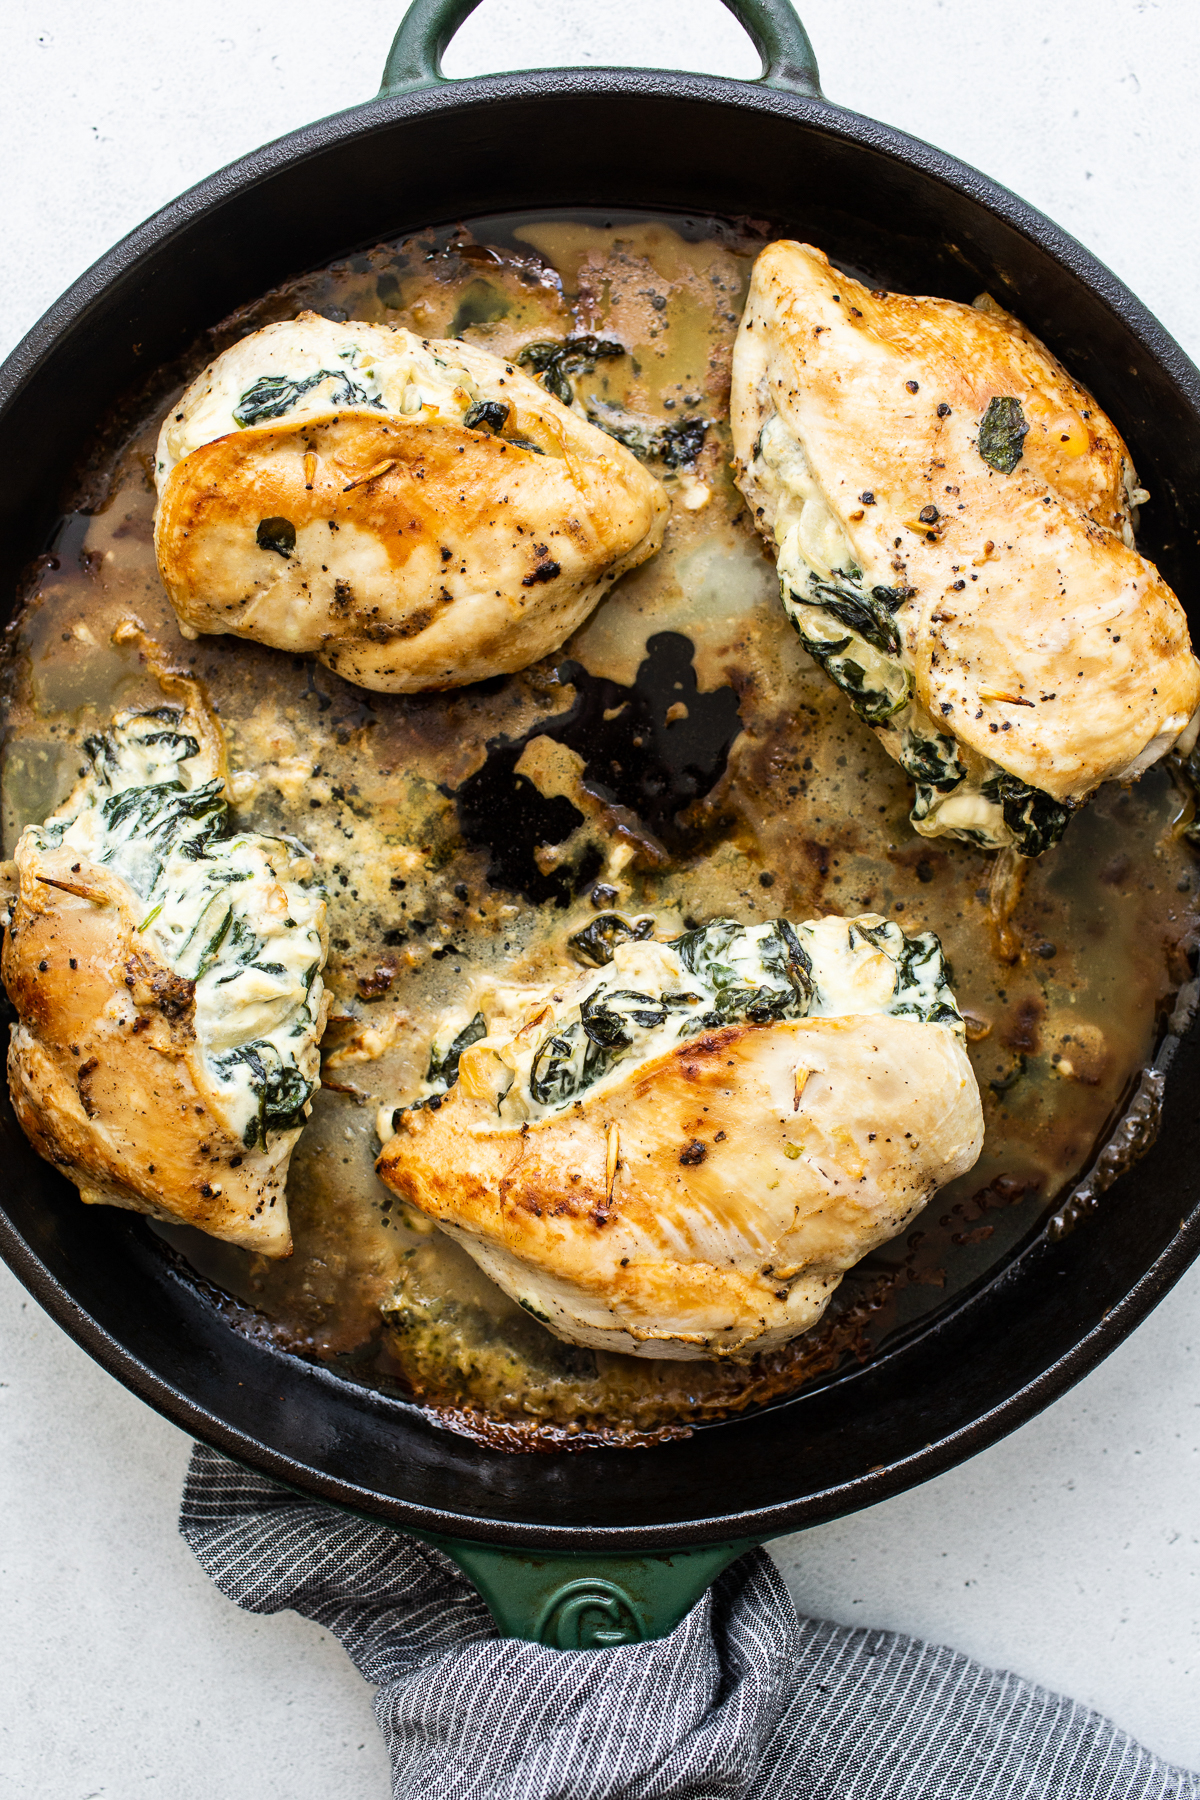 Stuffed chicken breast cooking in a skillet.